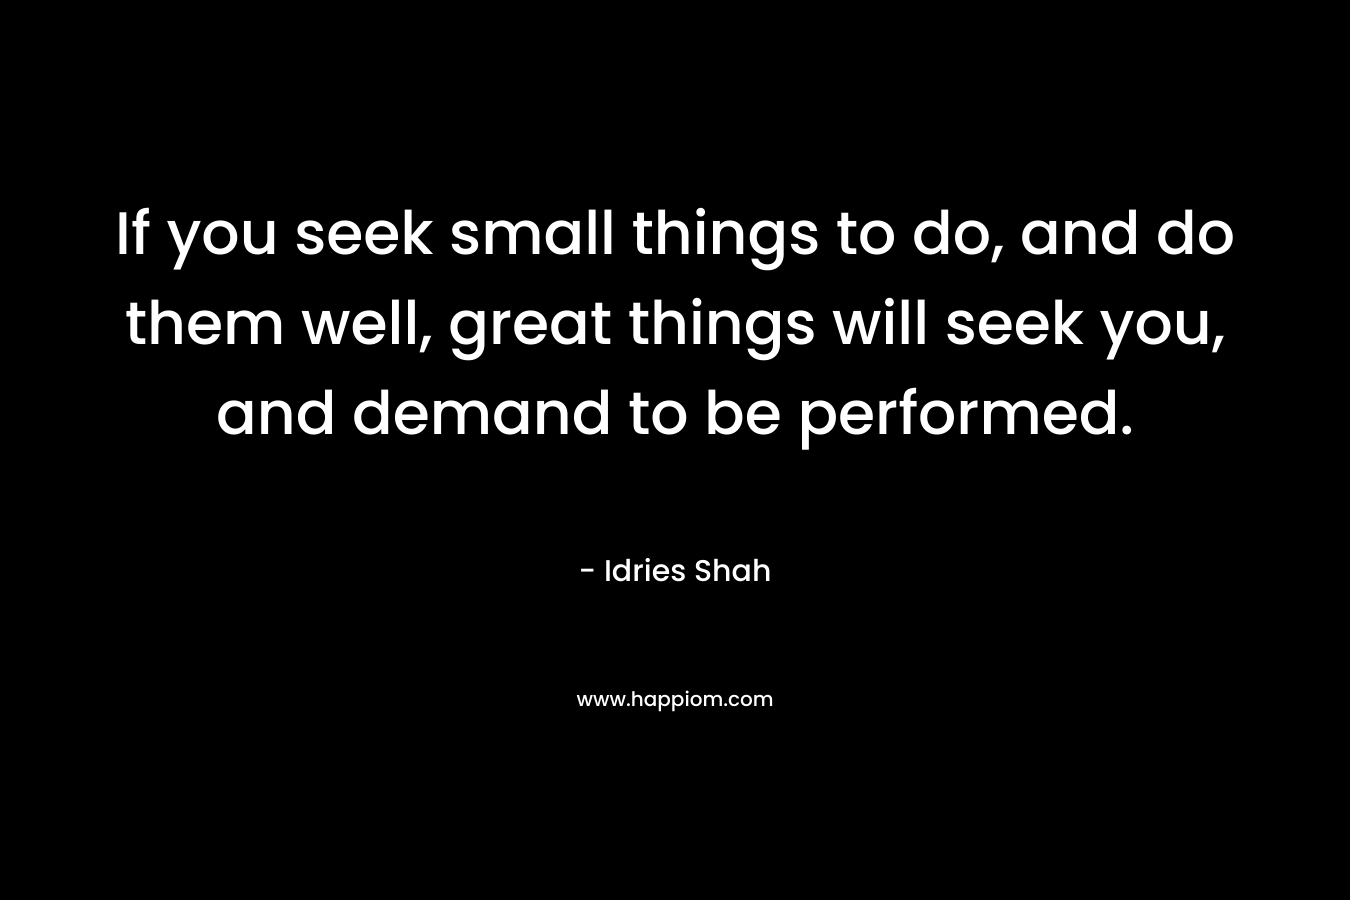 If you seek small things to do, and do them well, great things will seek you, and demand to be performed.